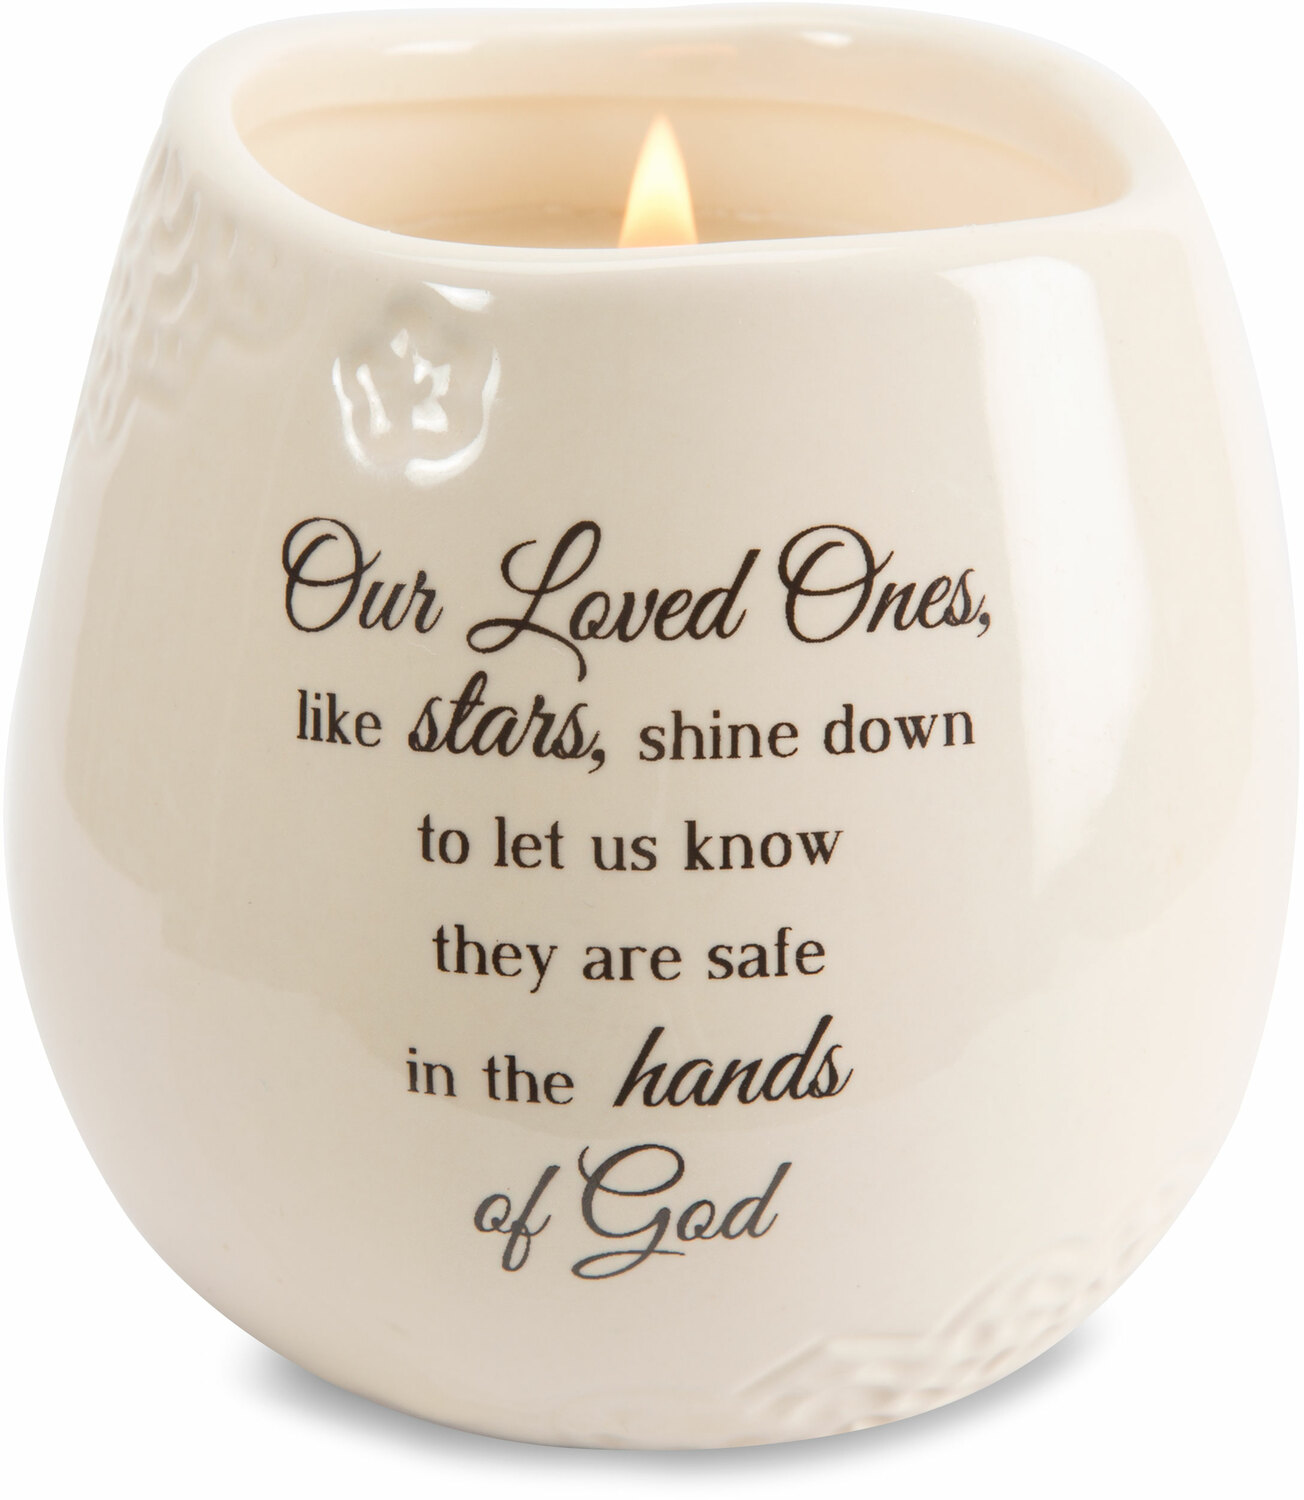 Loved One by Light Your Way Memorial - Loved One - 8 oz - 100% Soy Wax Candle
Scent: Tranquility